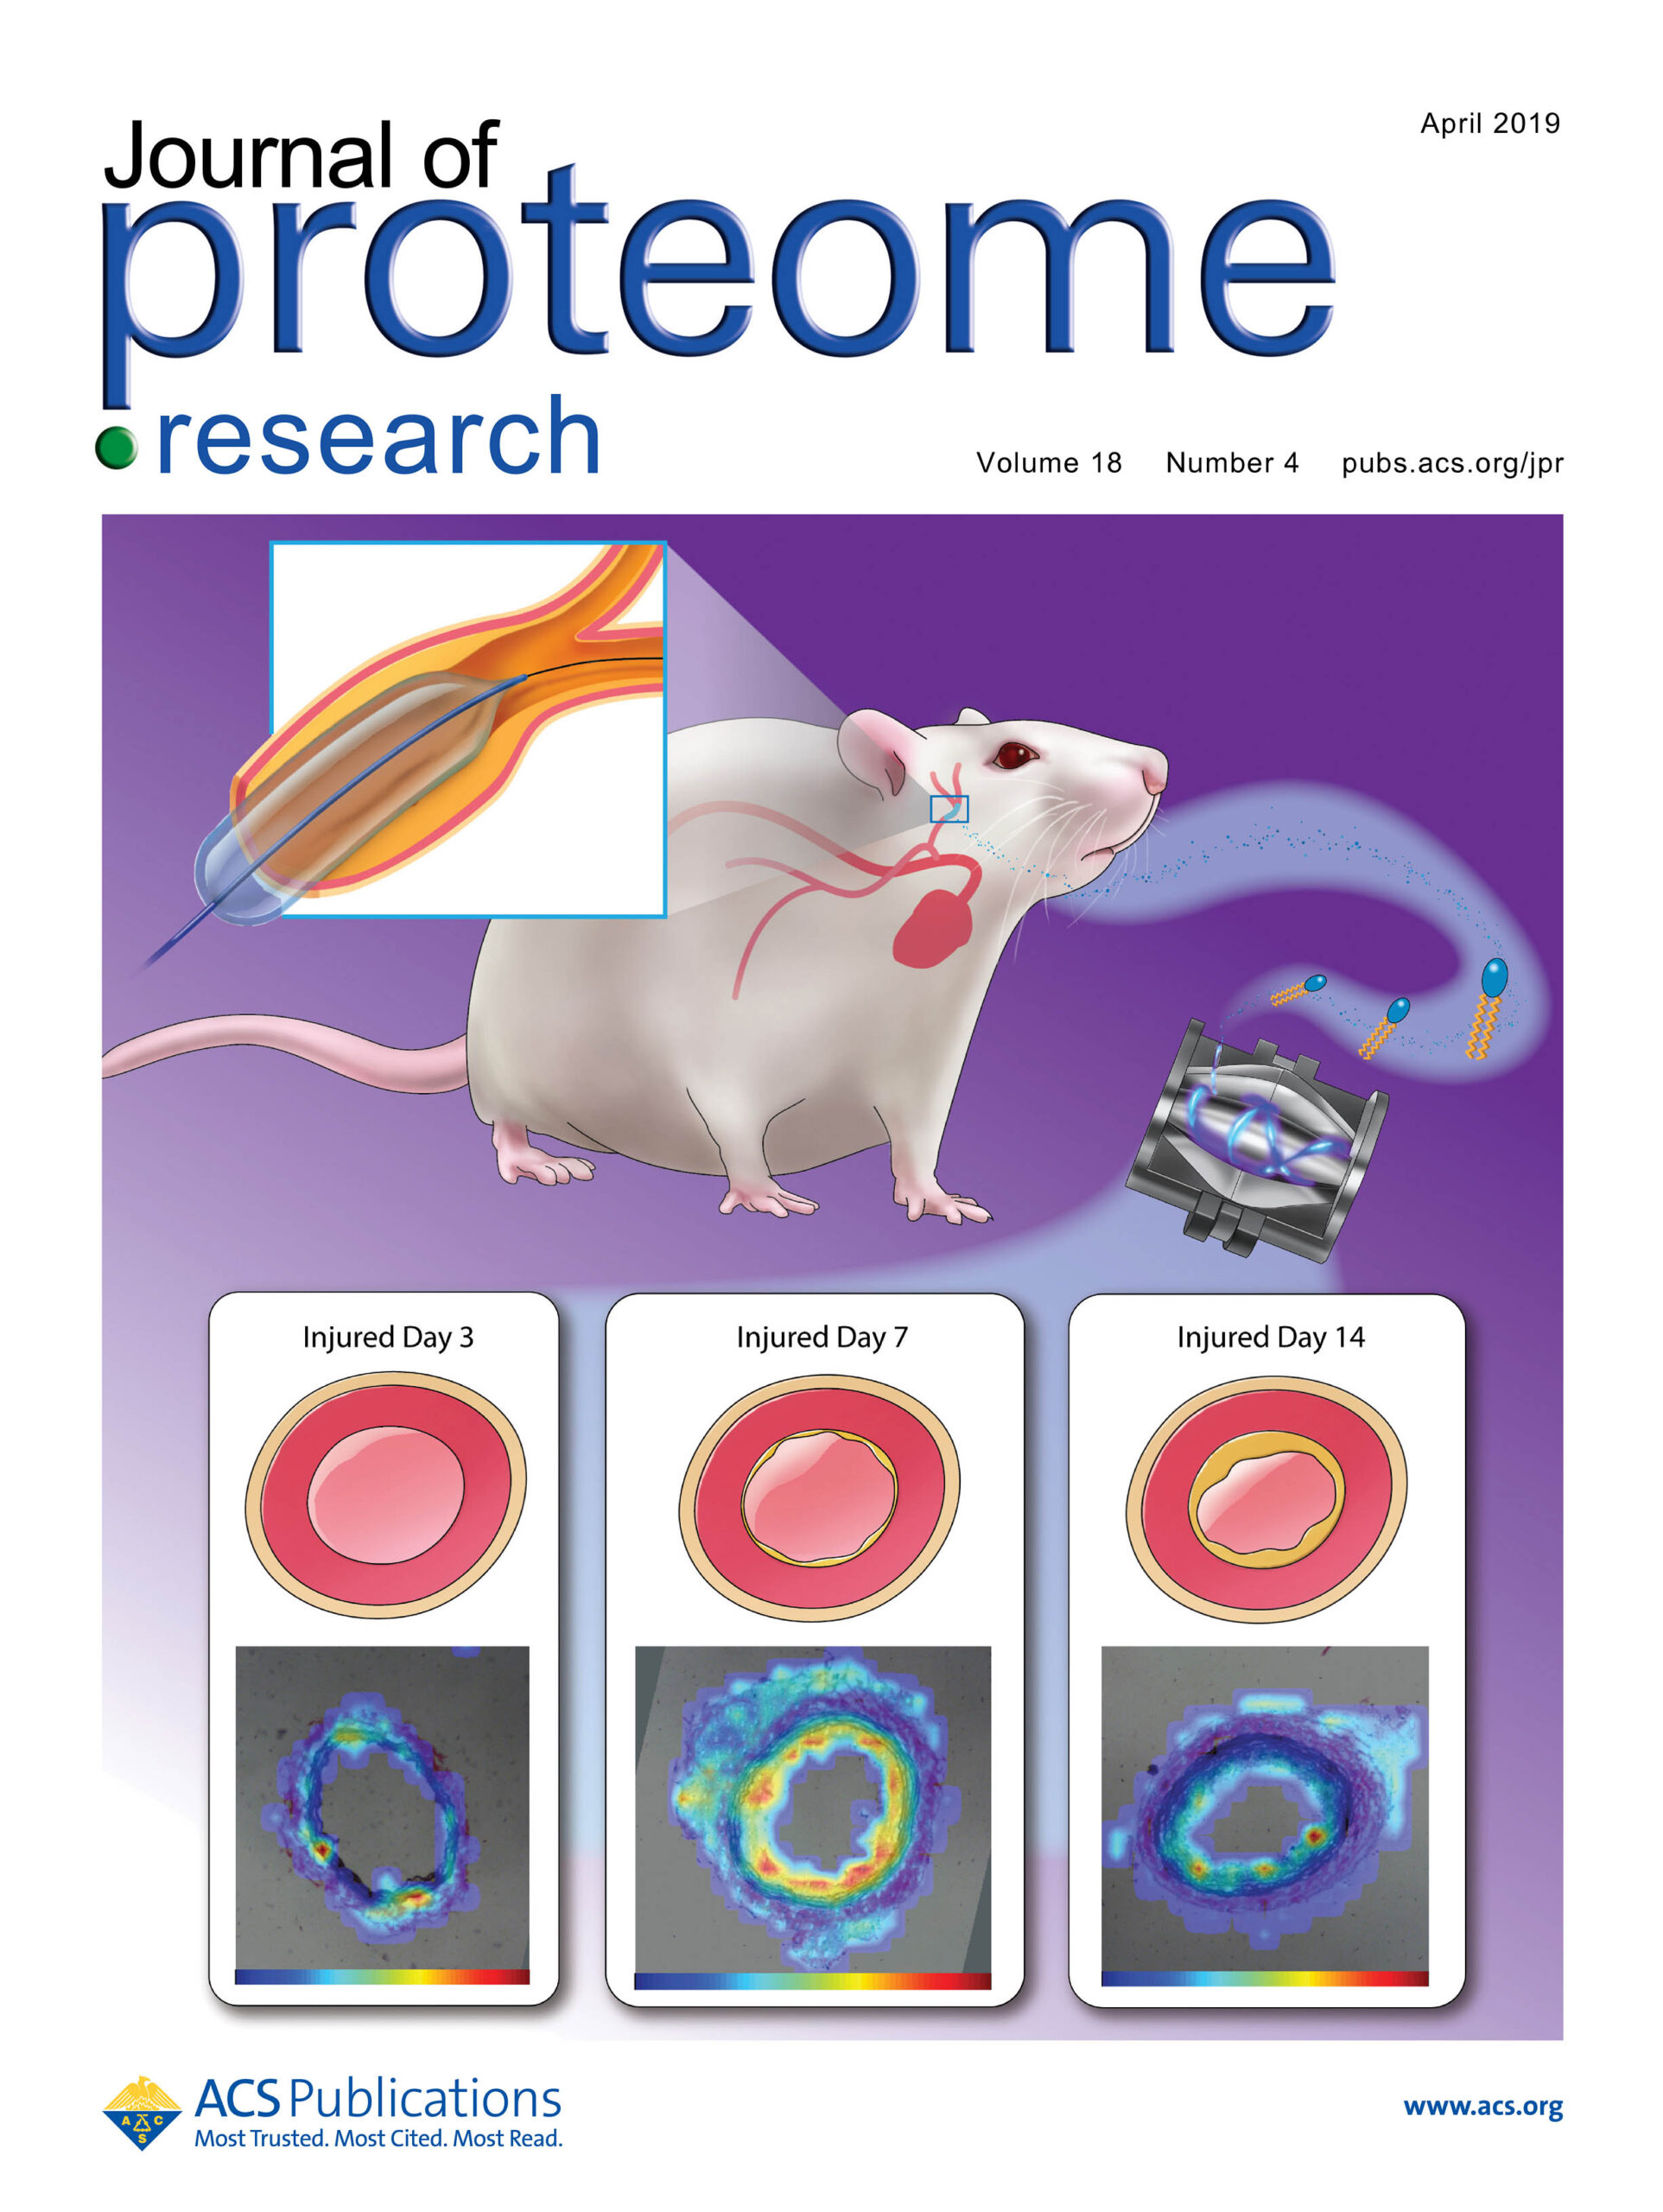 Journal of Proteome Research Volume 18 No. 4 cover